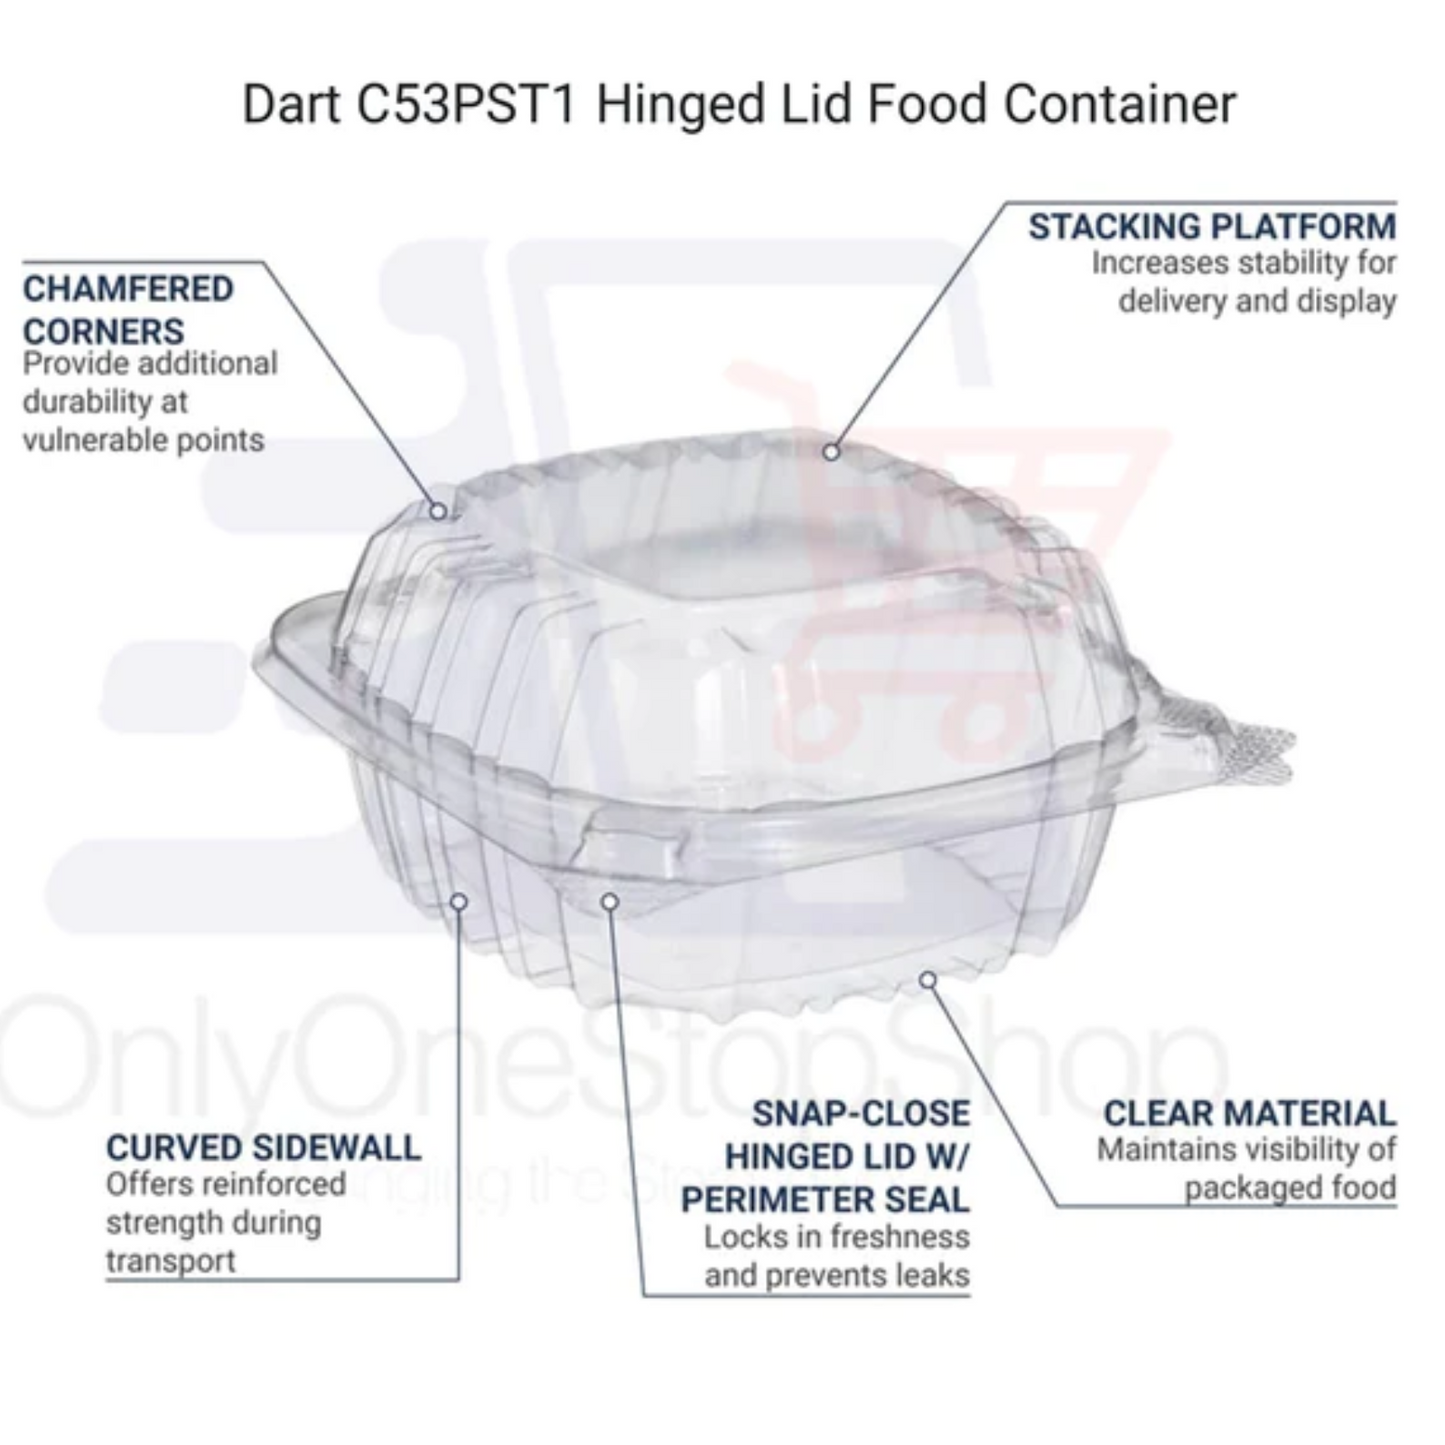 *WHOLESALE* DART Model # C53PST1| ClearSeal Hinged Lid Container | 500 ct/case Salad Containers Dart   